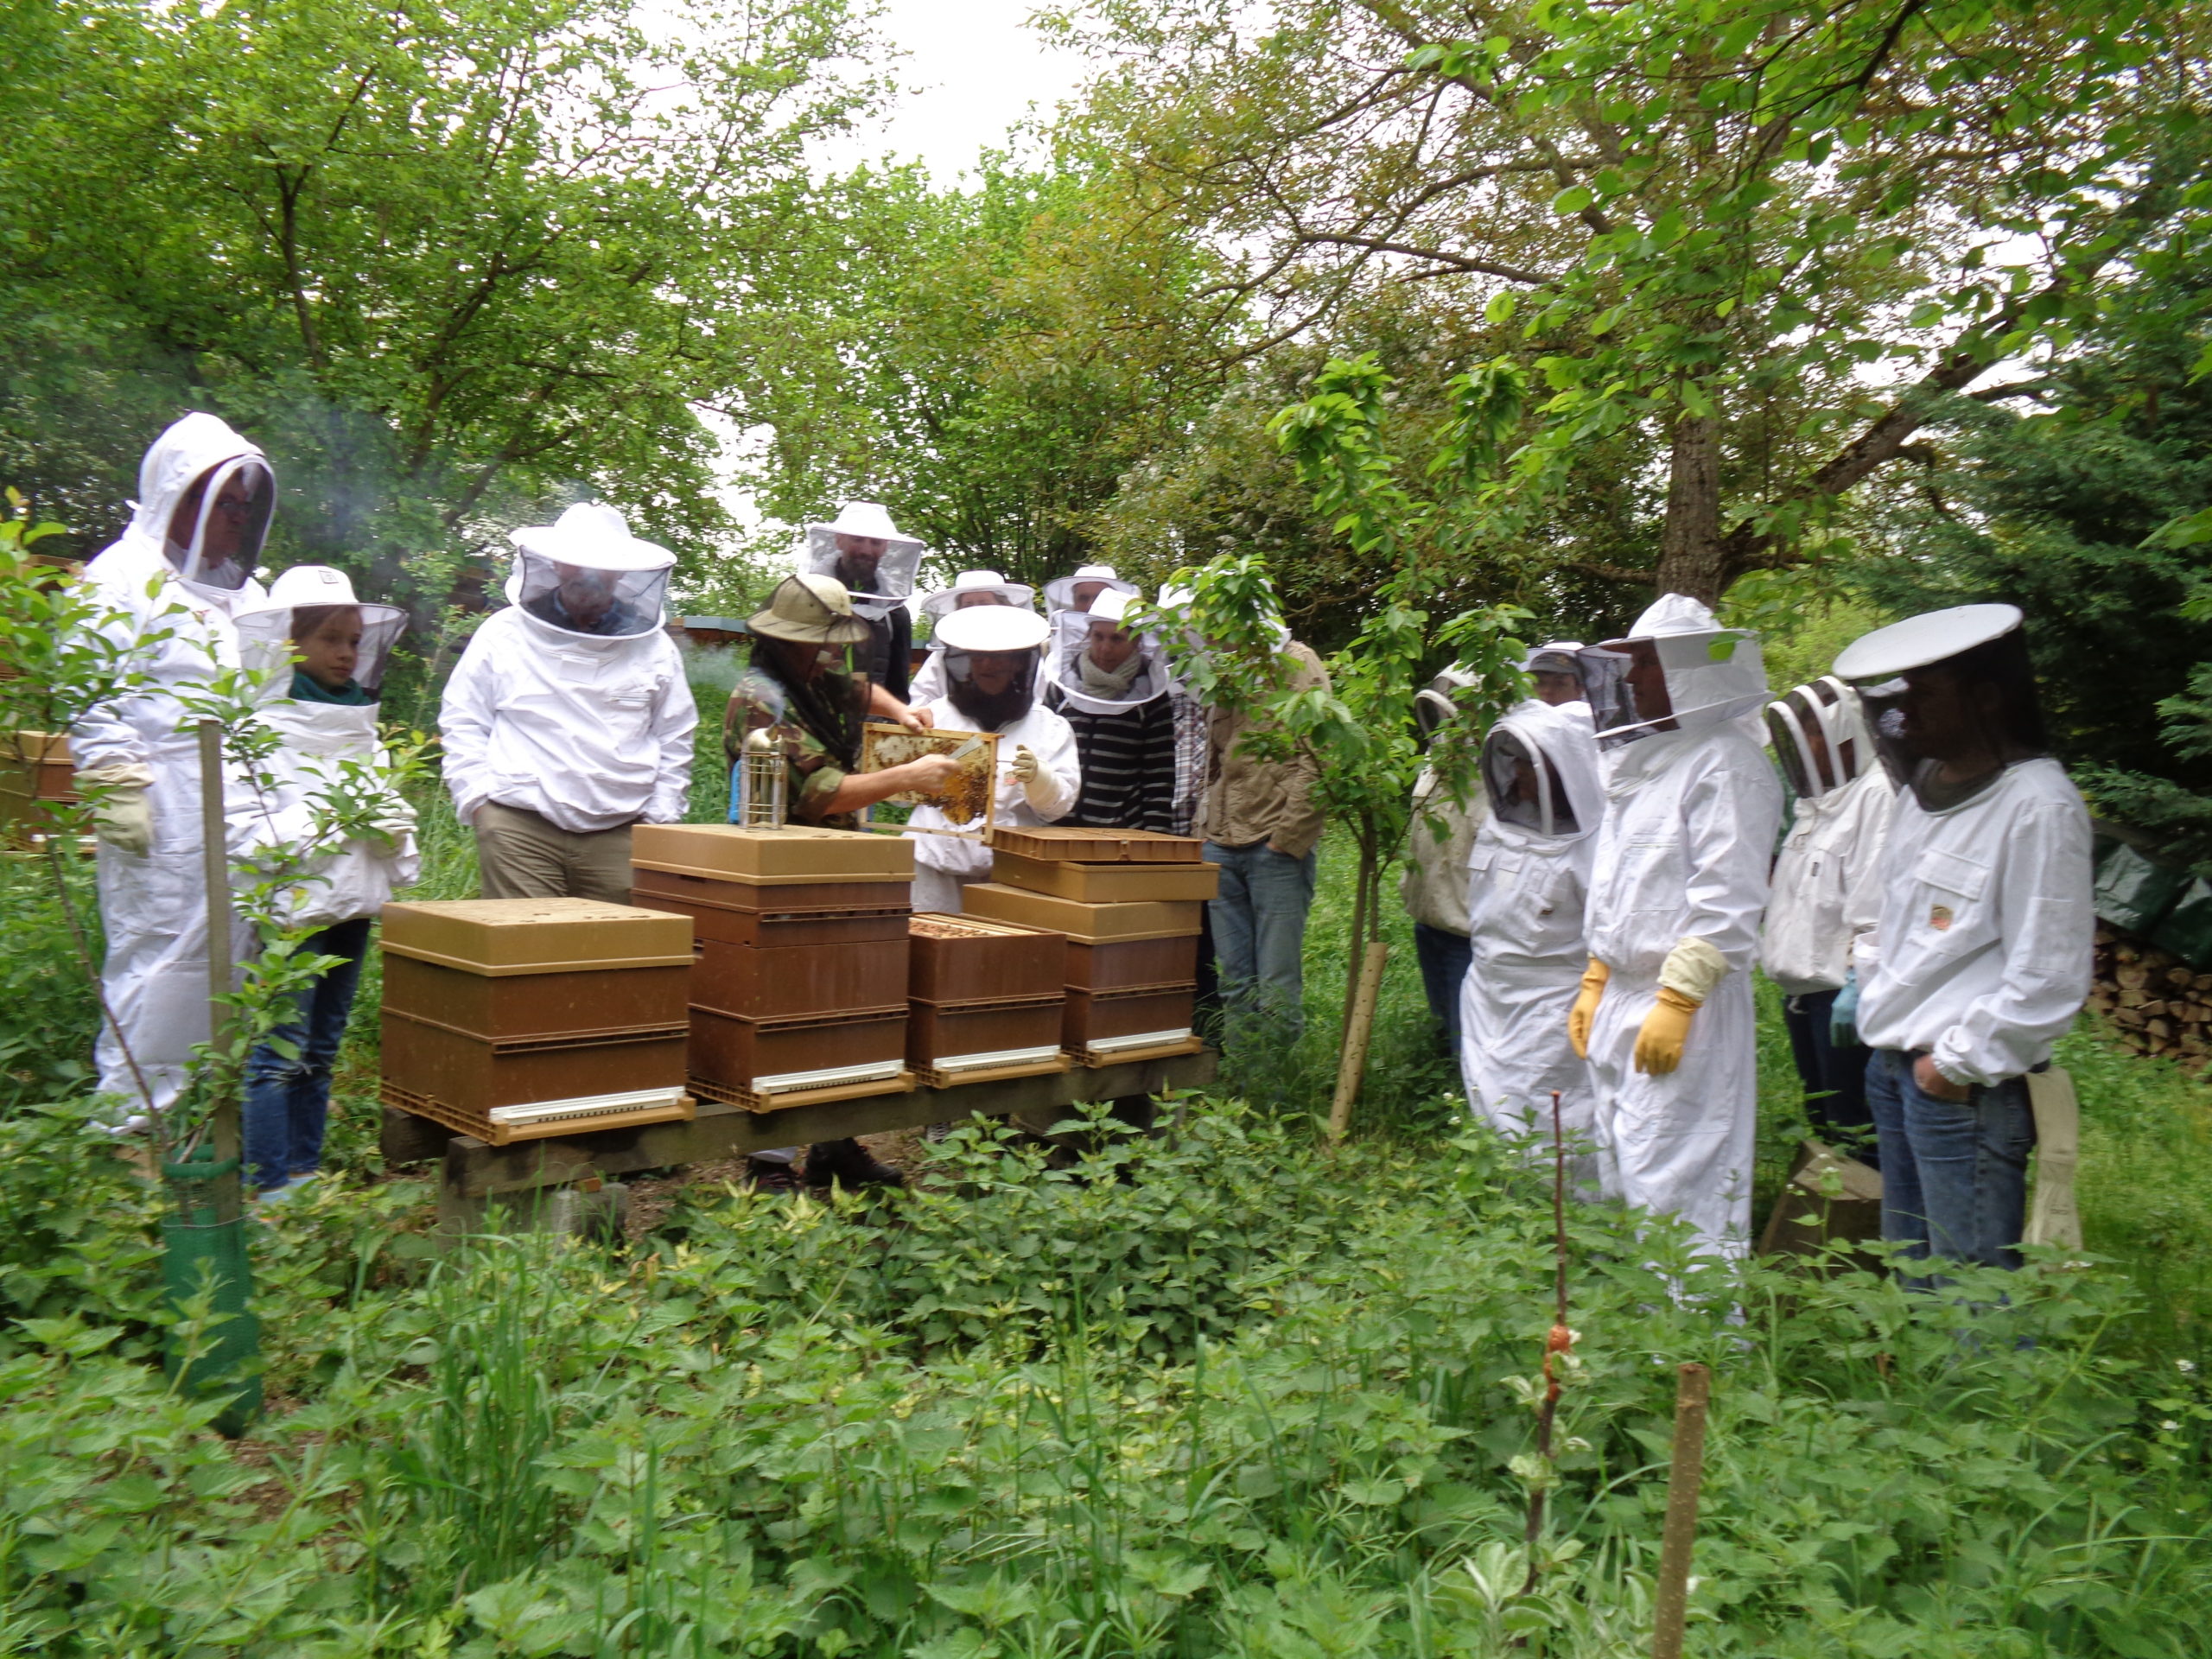 Formation apiculture